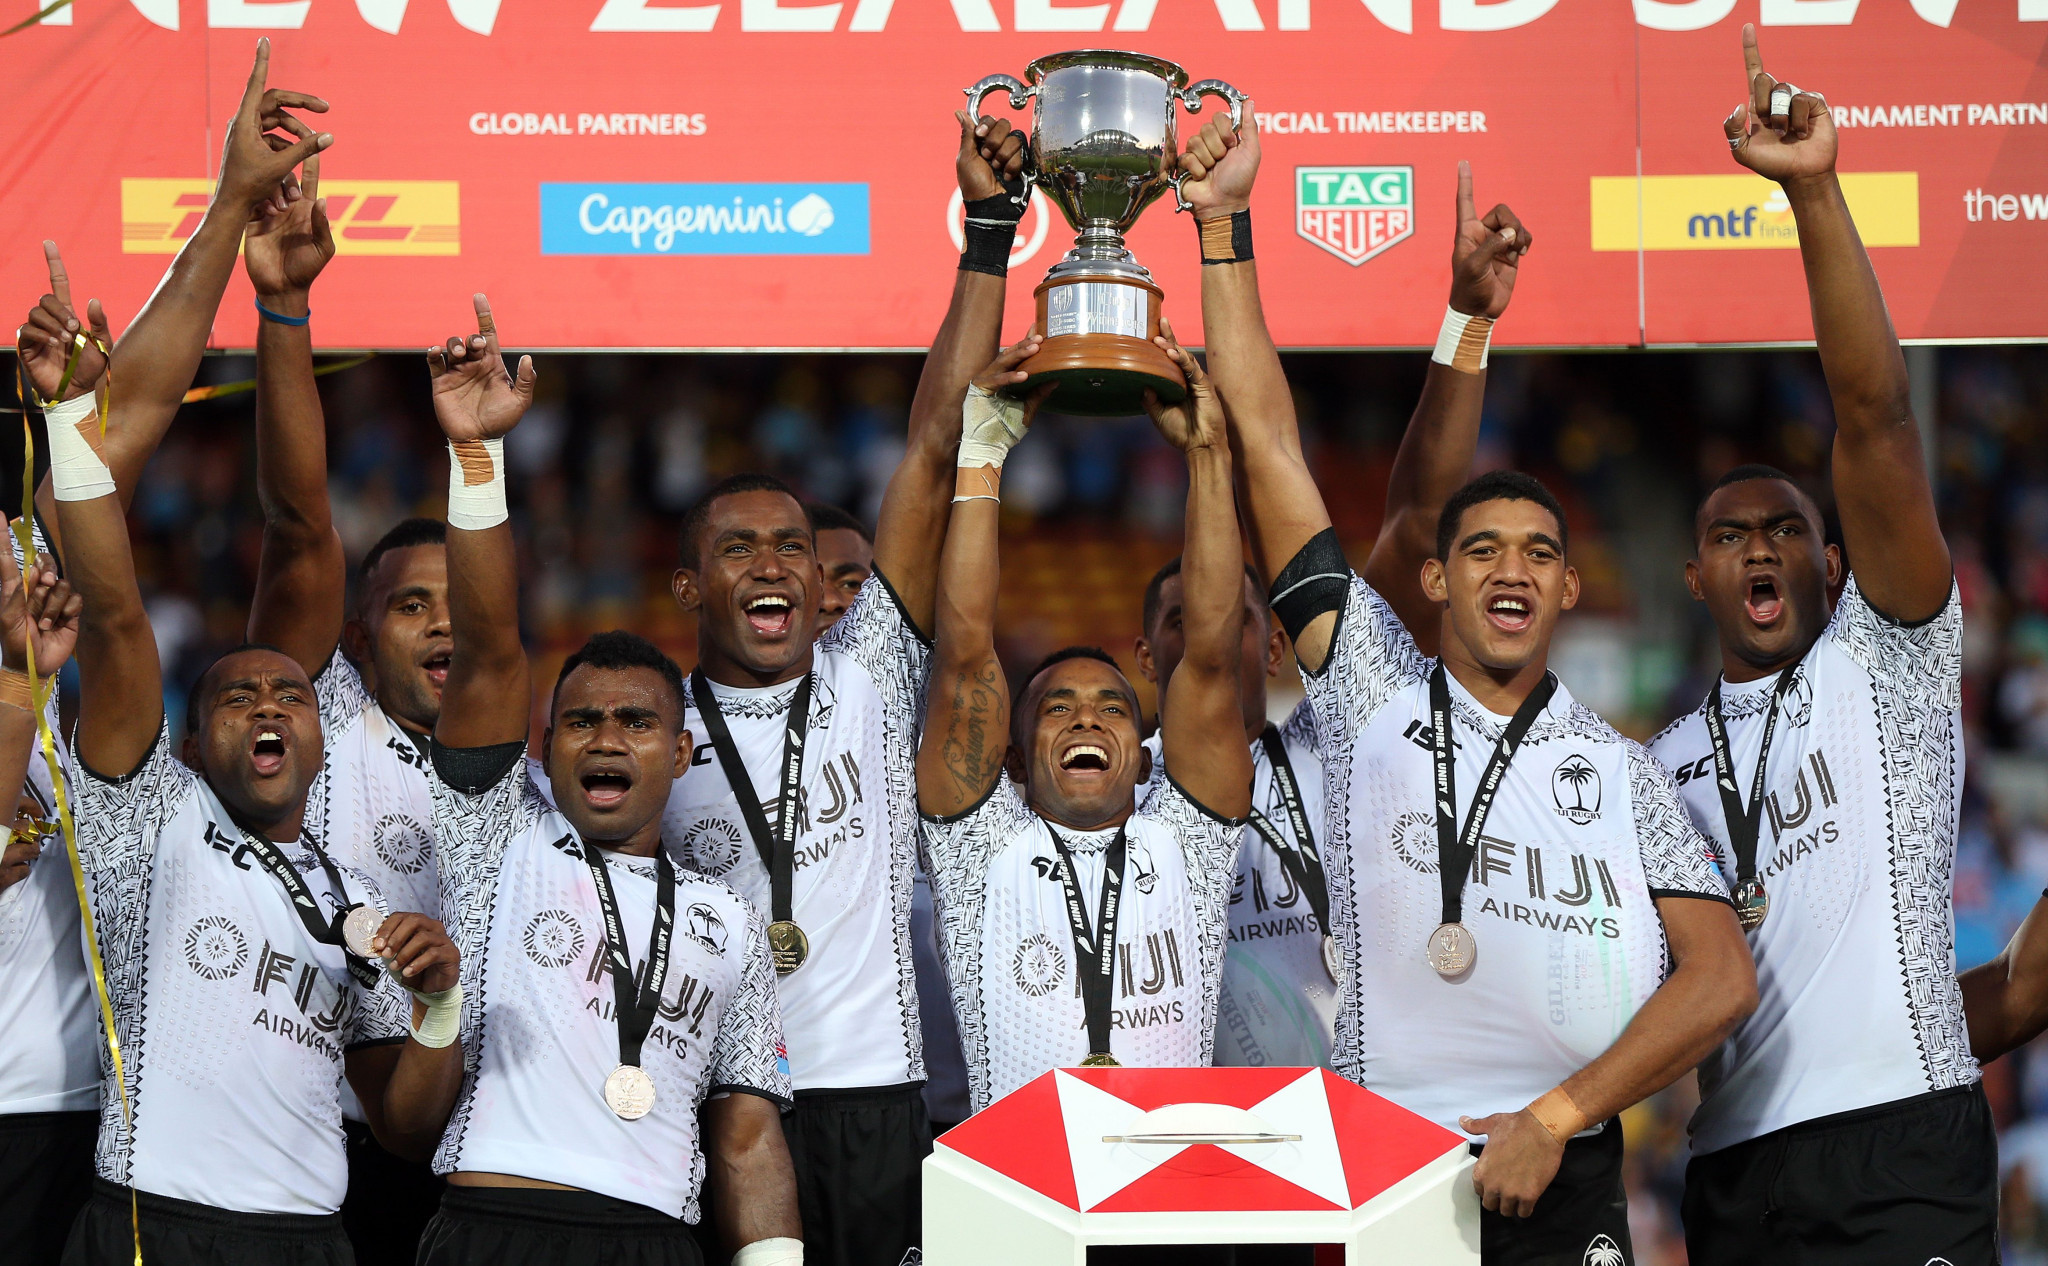 Fiji won their second World Rugby Seven Series event of the season in Hamilton ©Getty Images